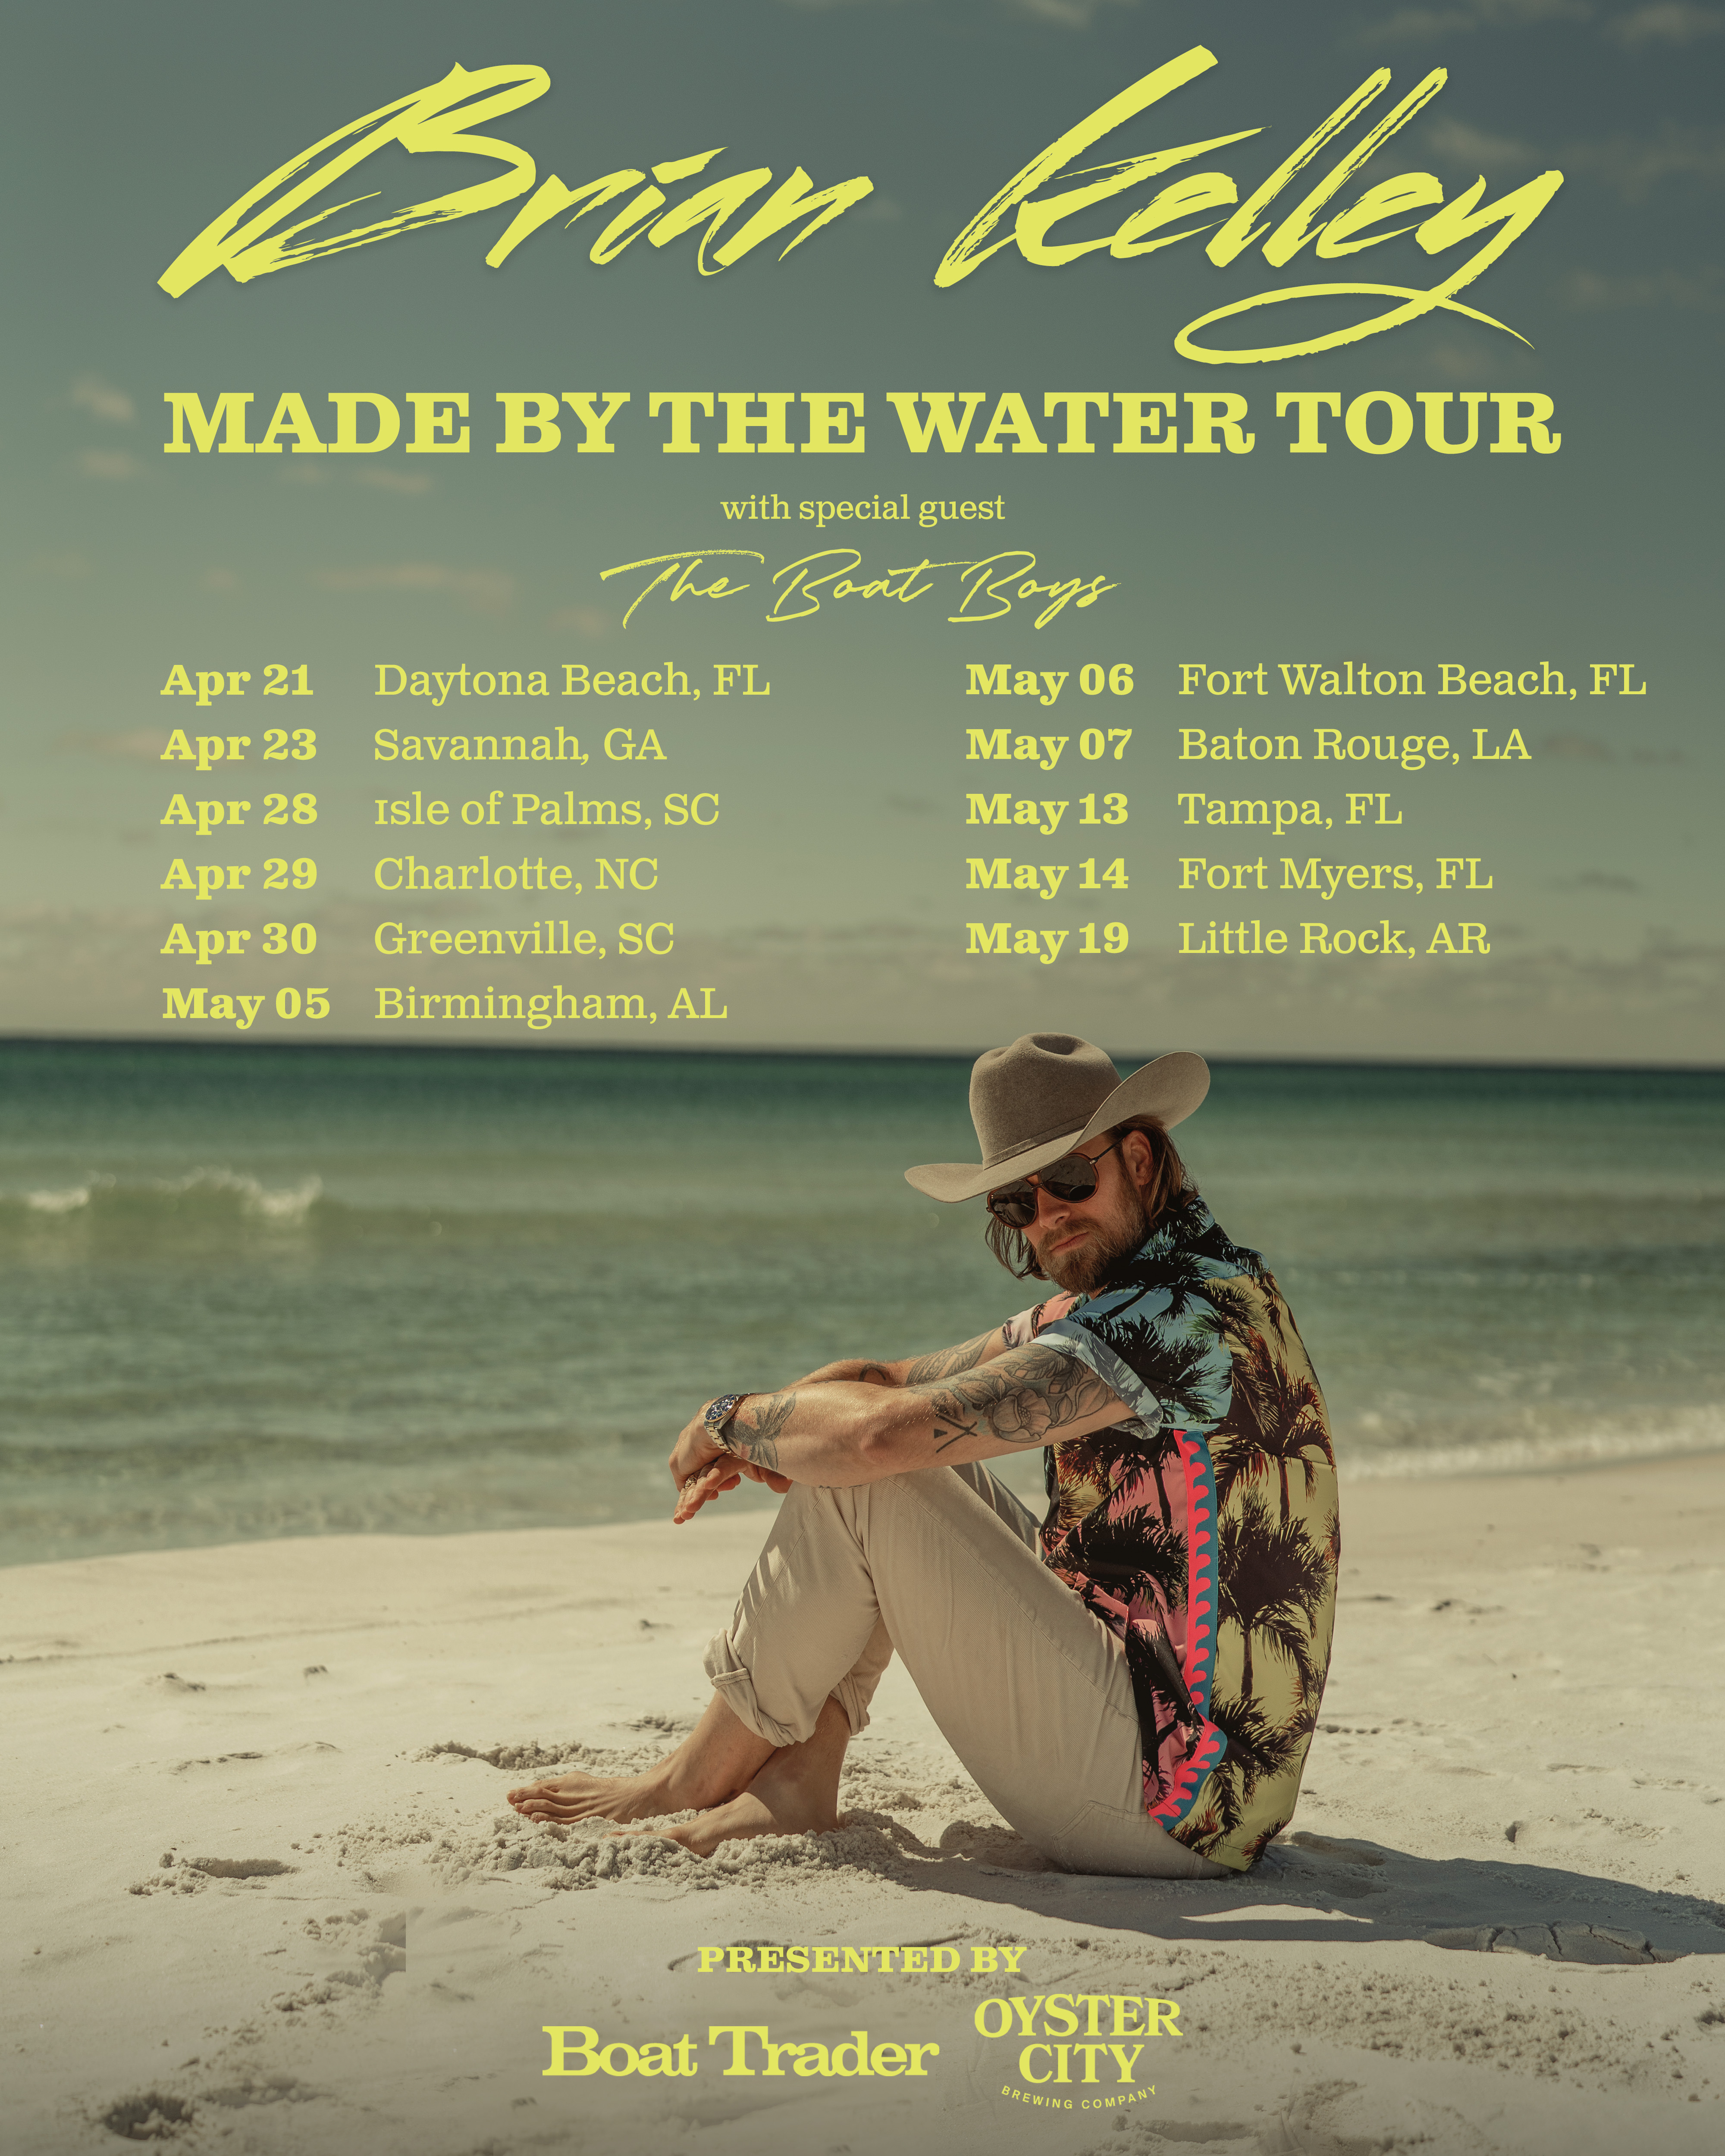 BRIAN KELLEY CAPTAINS "MADE BY THE WATER TOUR" THIS SPRING